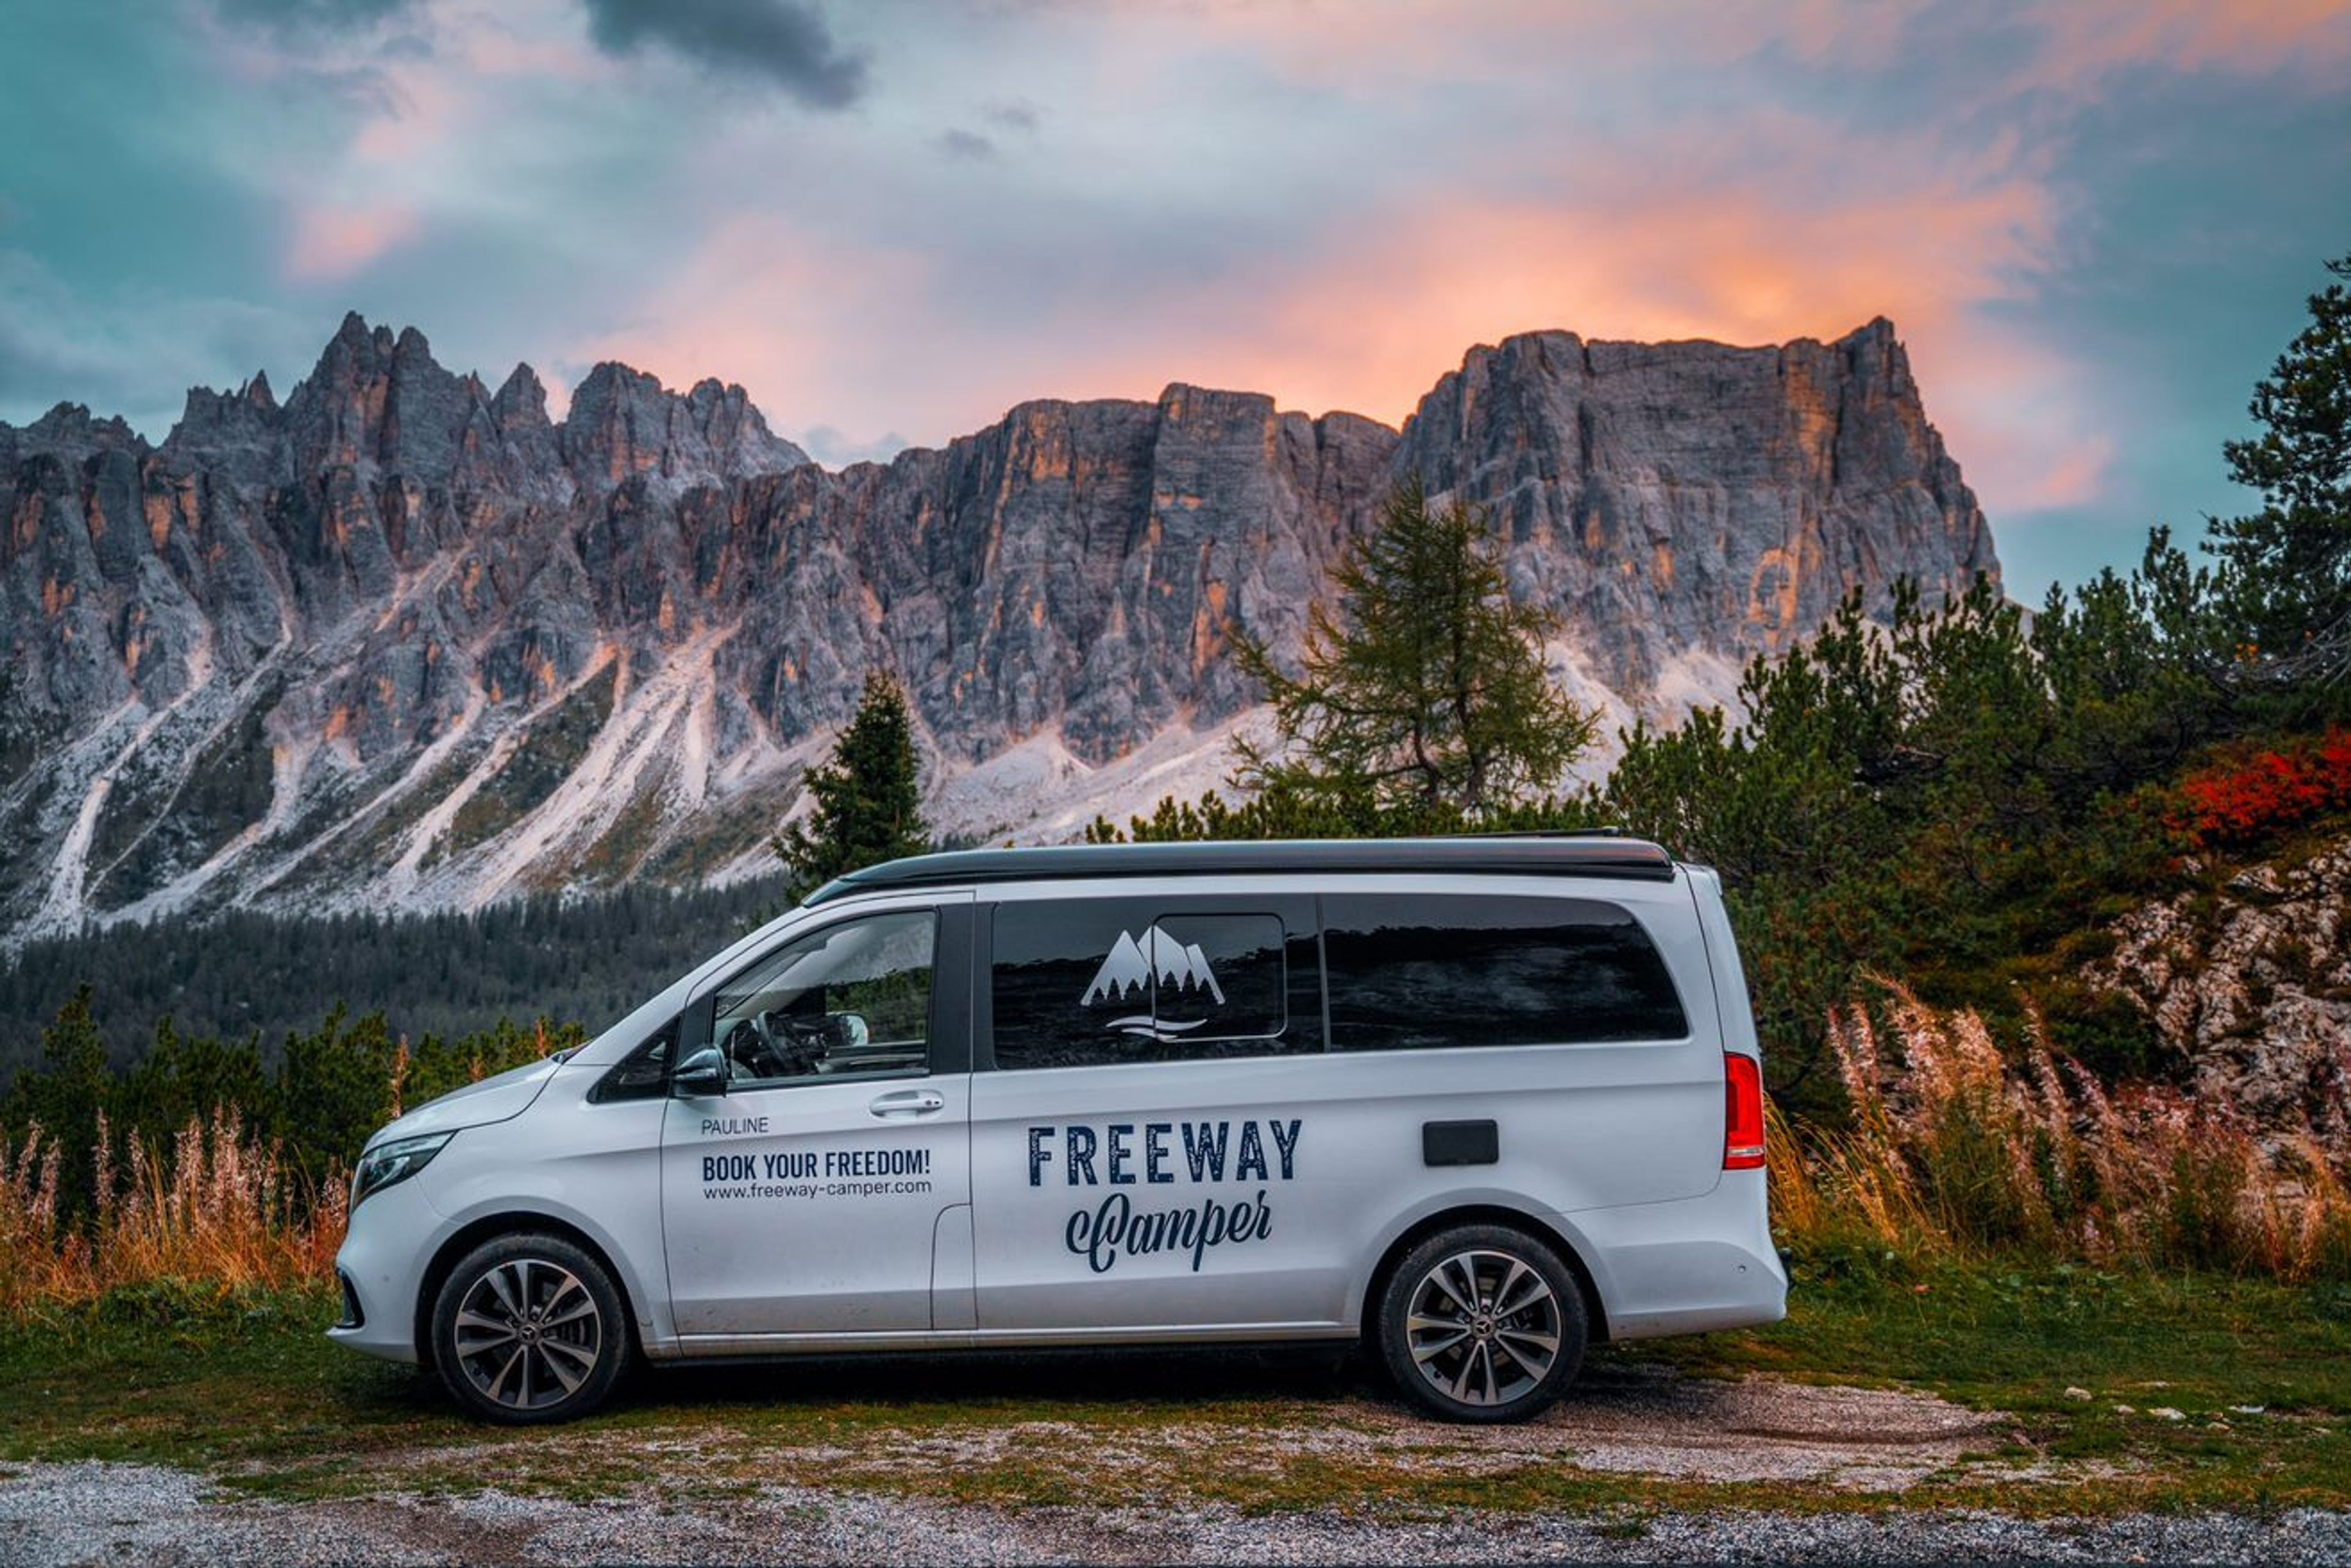 Mercedes Marco Polo at sunset against a wintry mountain backdrop